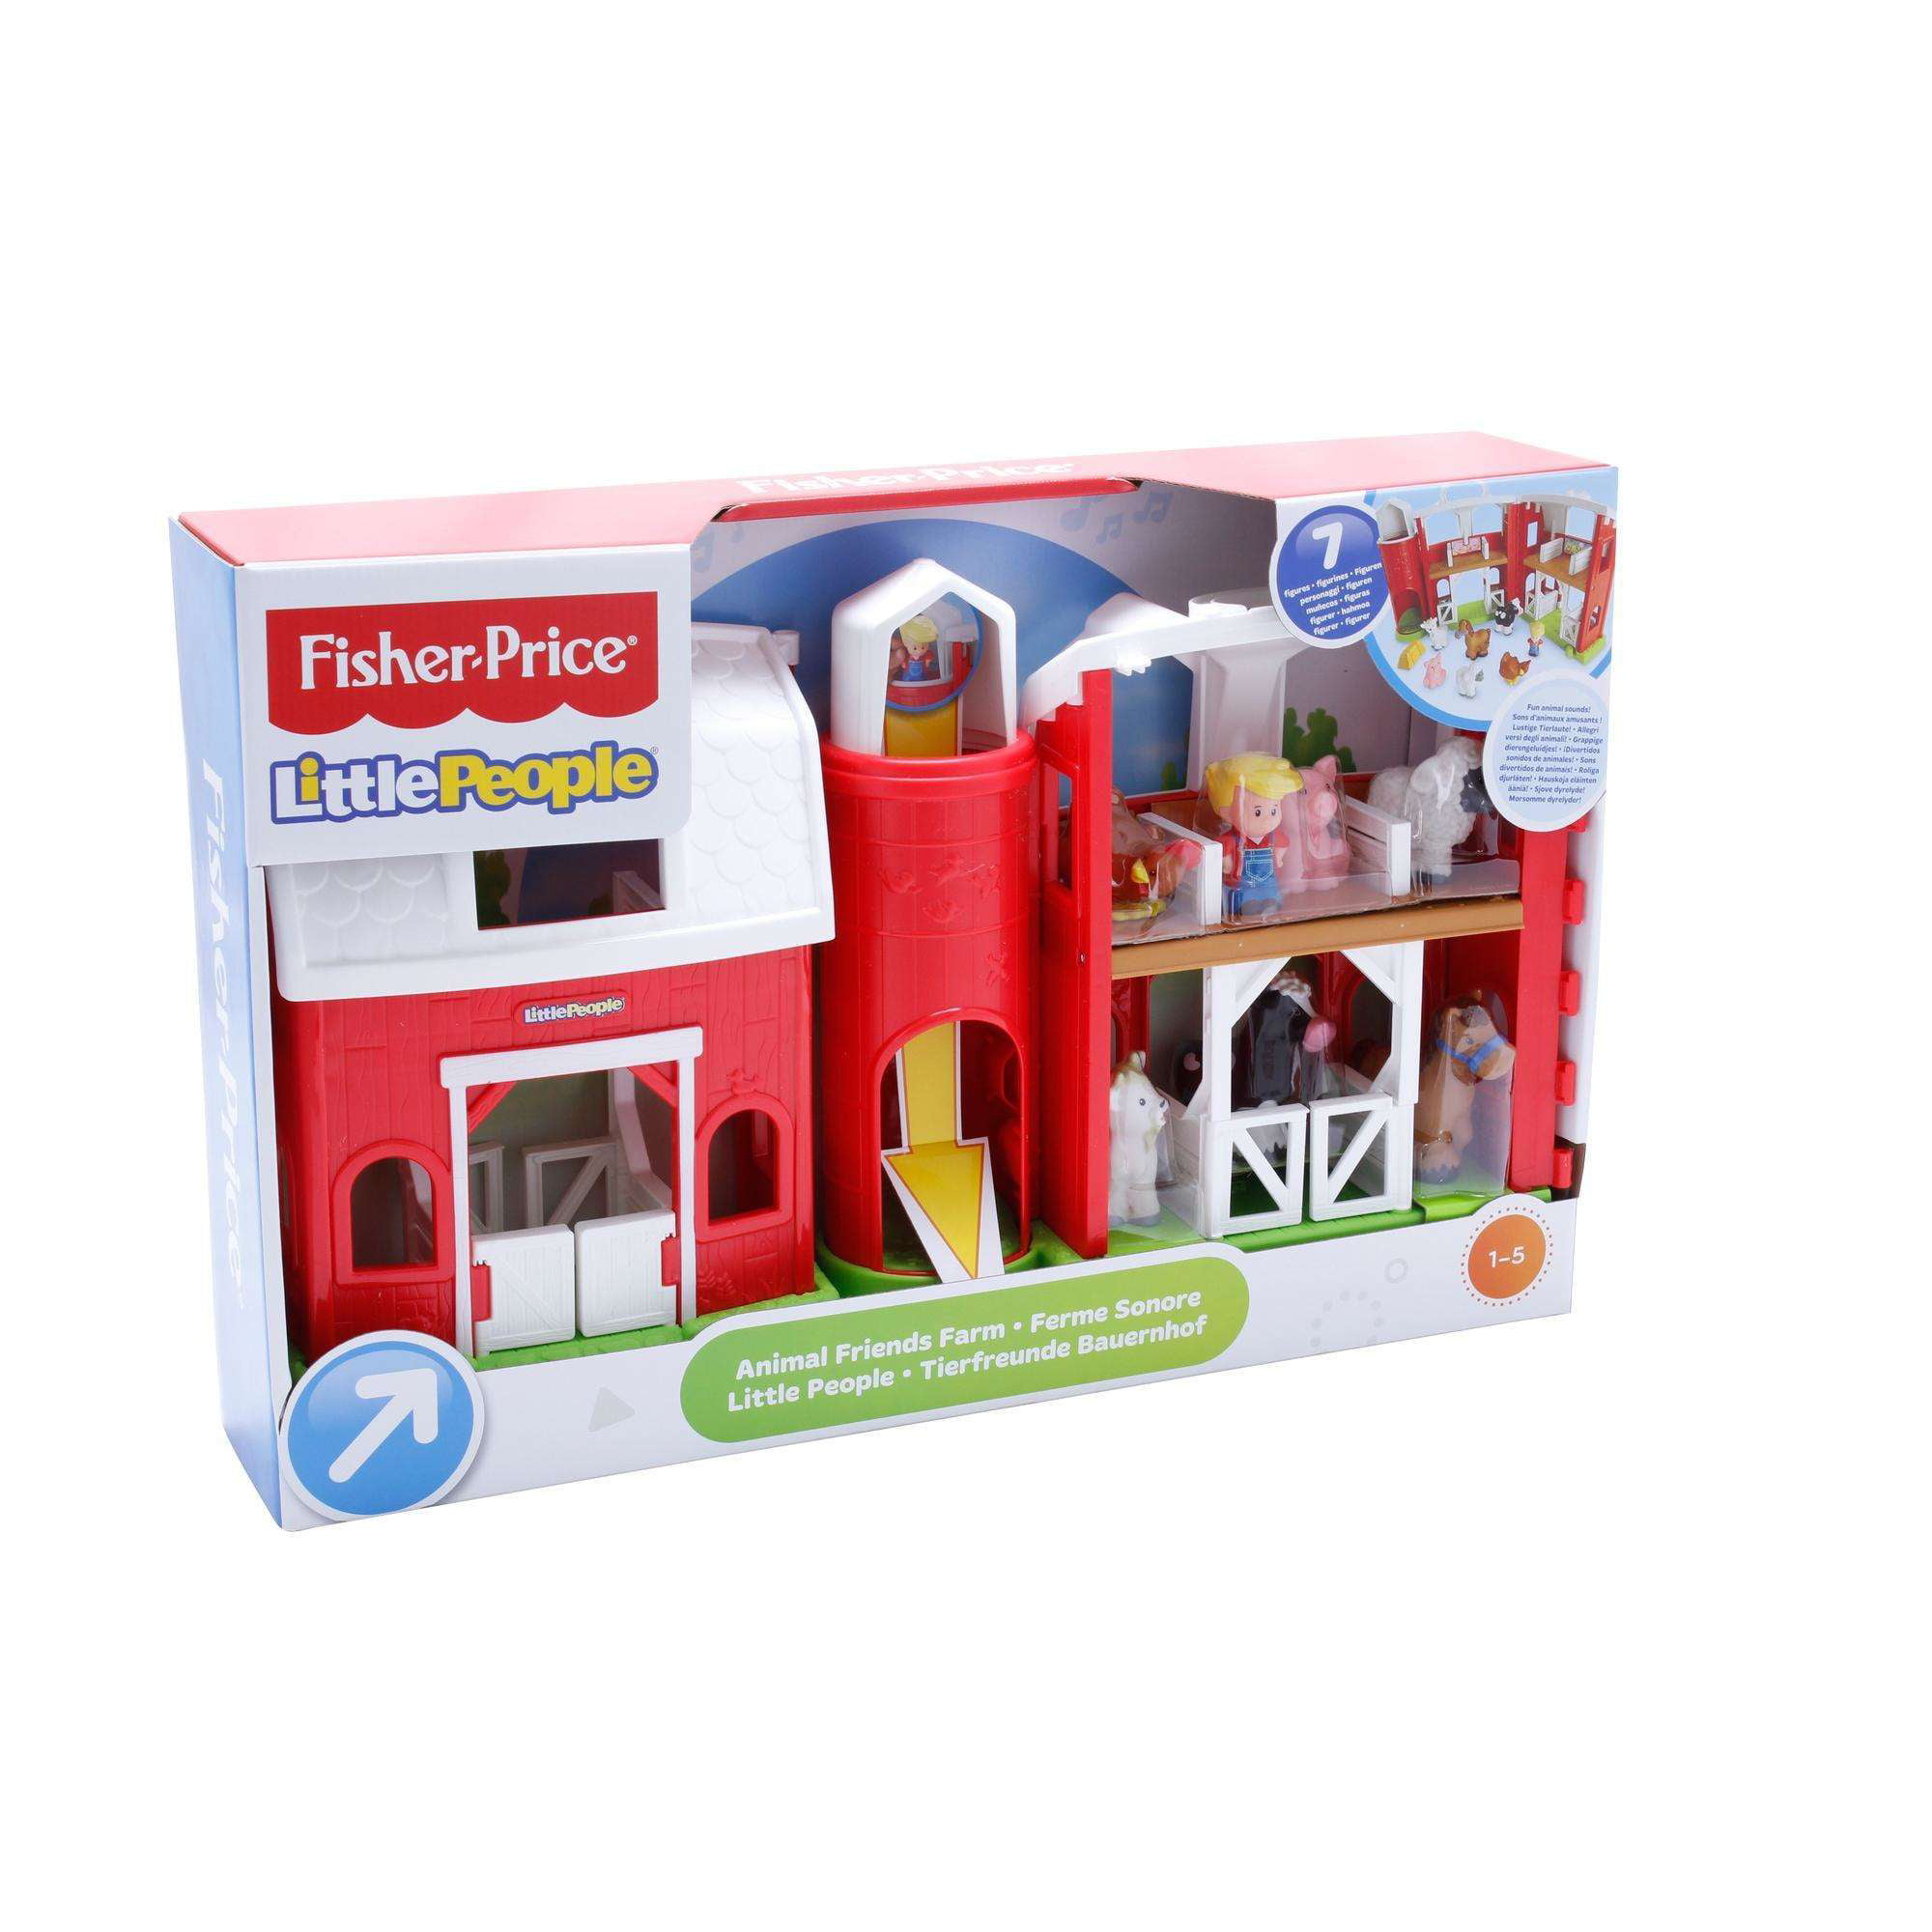 Fisher-Price Little People Animal Friends Farm Gift Set of 7 Figures for sale online